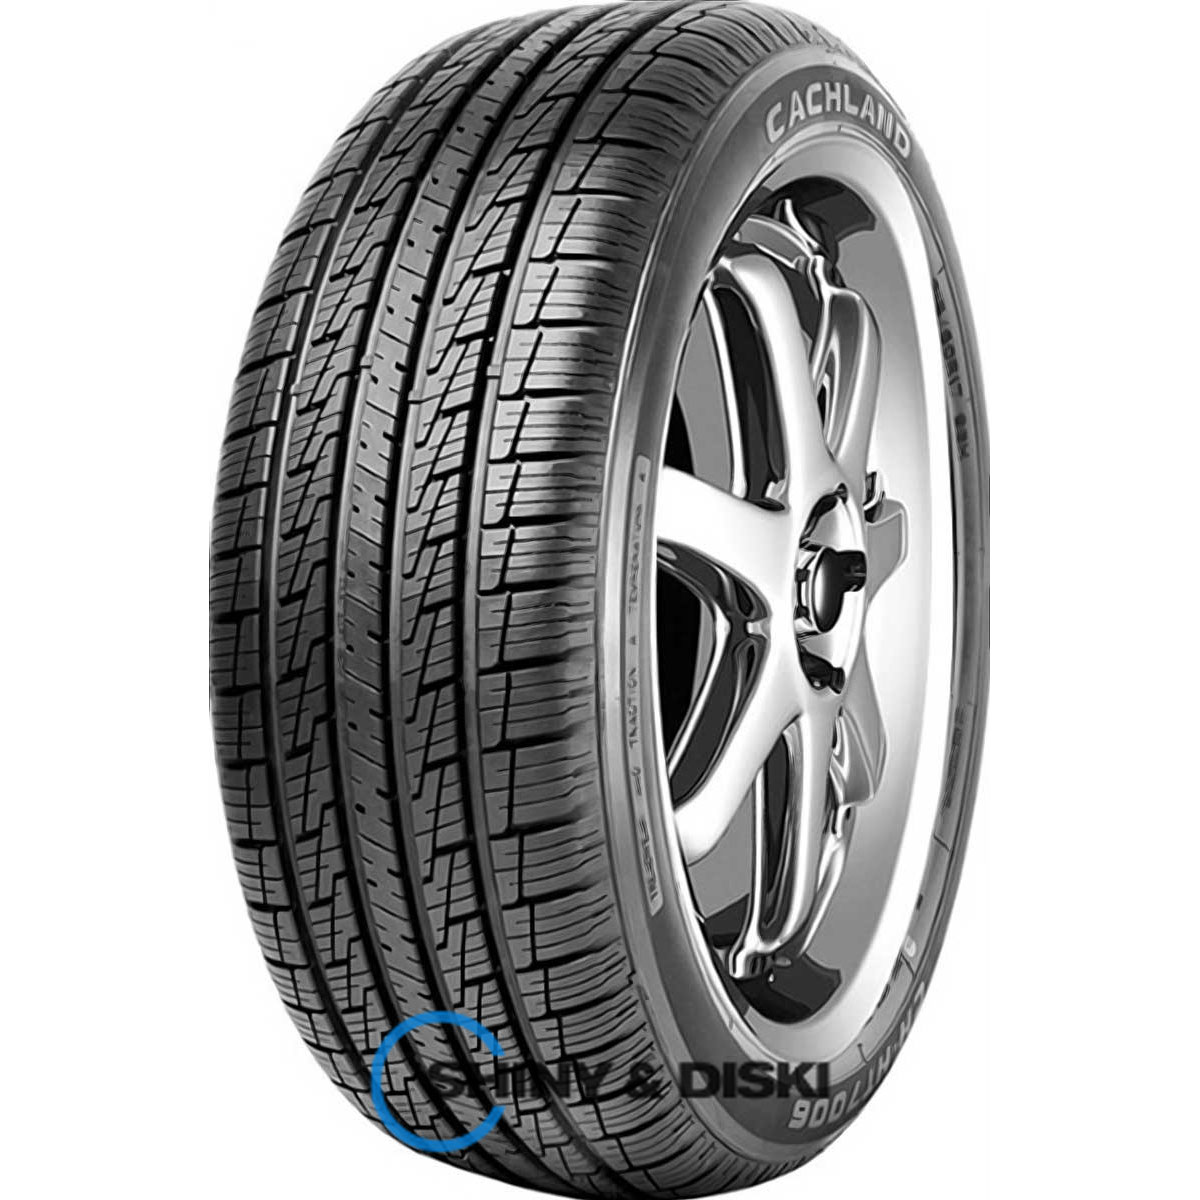 cachland ch-ht7006 215/70 r16 100h